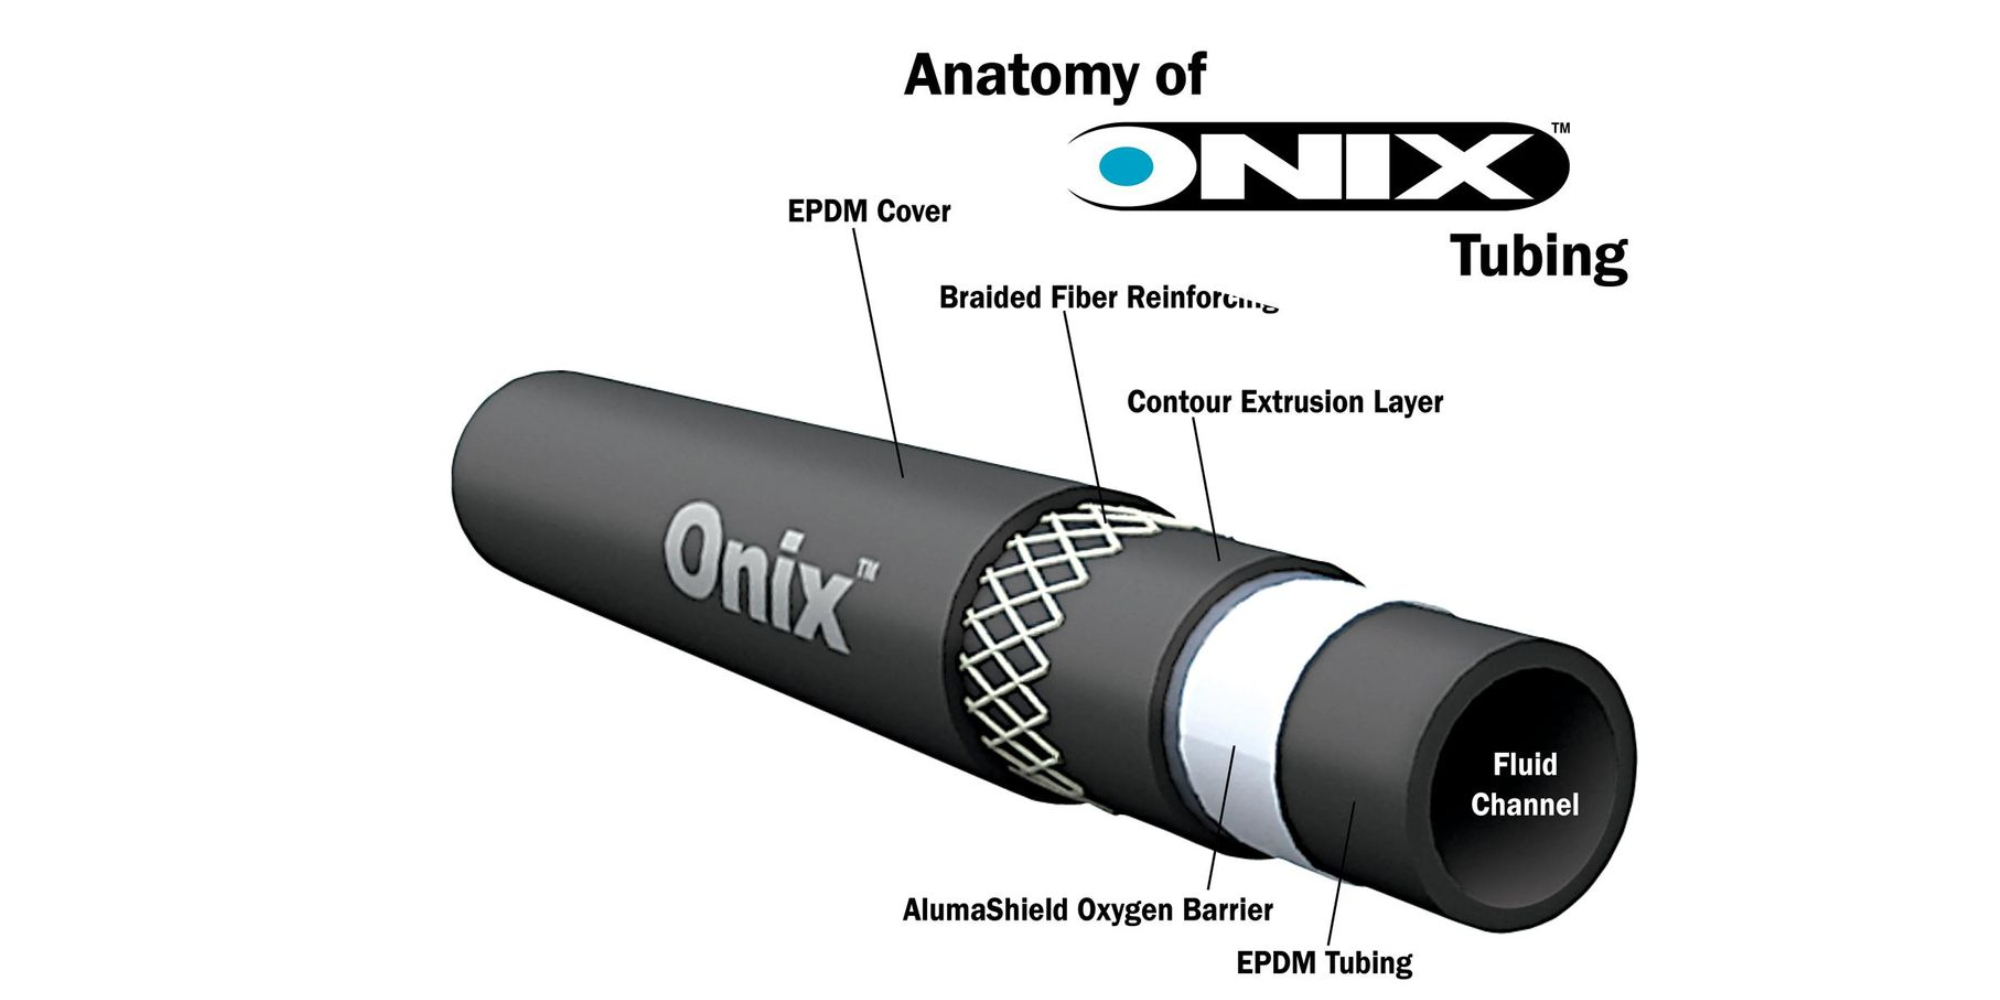 Anatomy of Onix Tubing. EPDM Cover. Braided Fiber Reinforcing. Contour Extrusion Layer. AlumaShield Oxygen Barrier. EPDM Tubing.